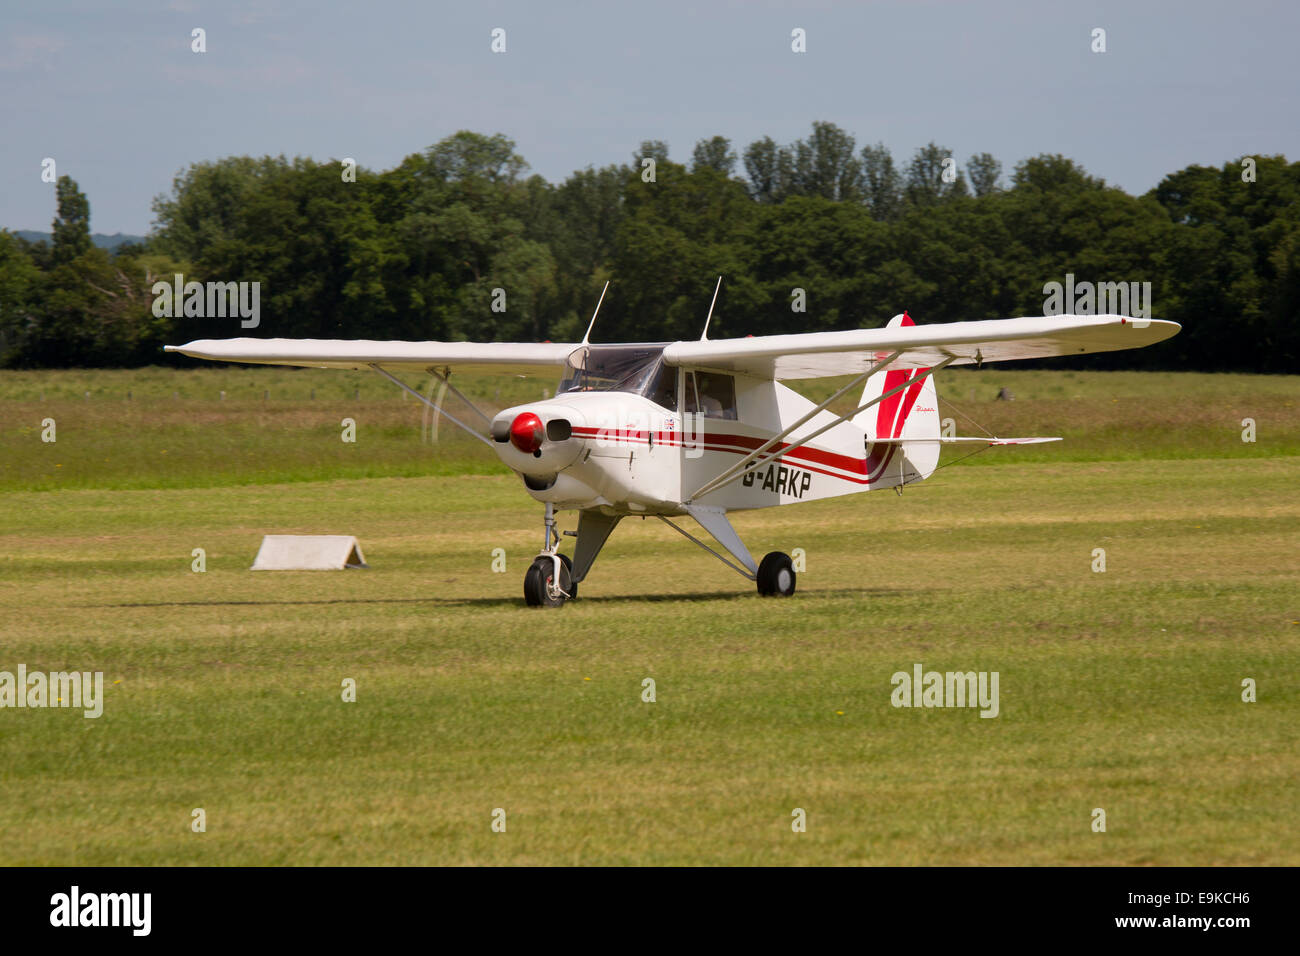 Piper PA-22-160 Colt G-ARKP taking off from grass runway at Headcorn Airfield Stock Photo